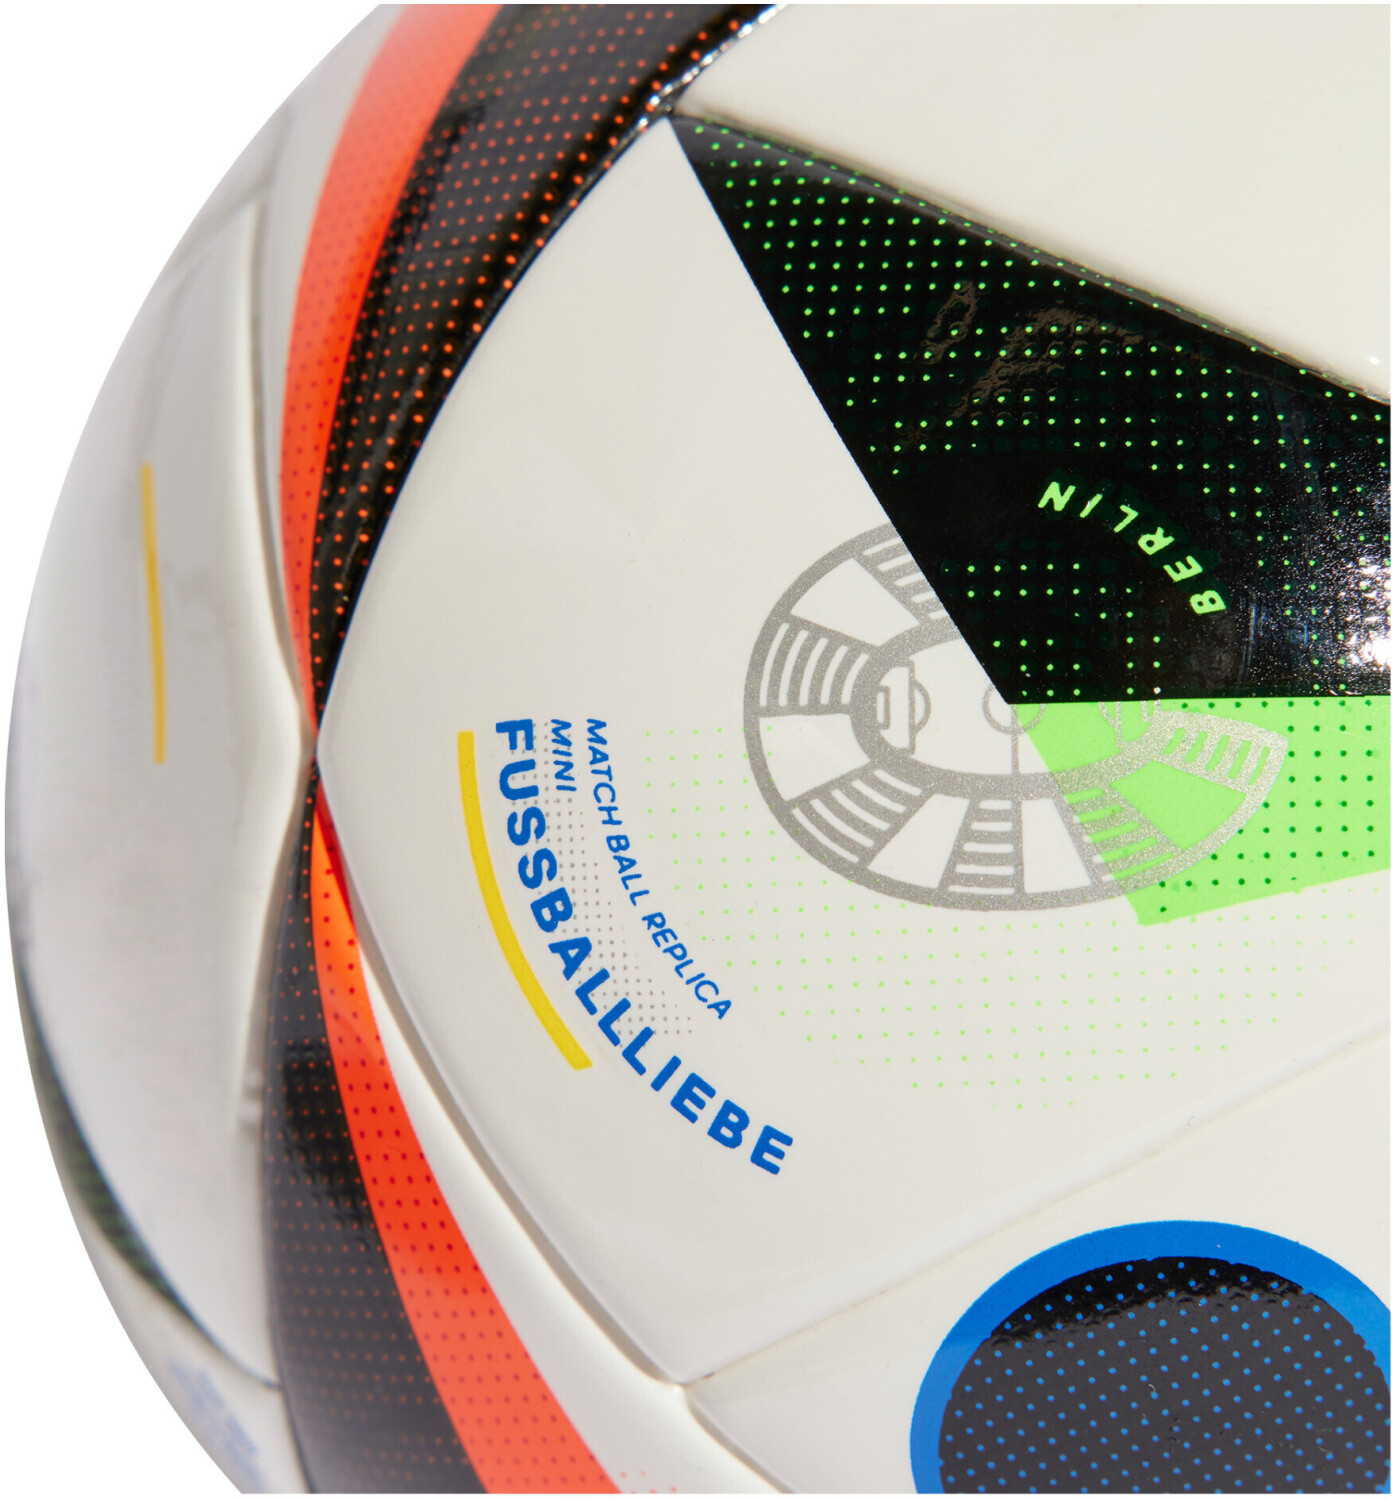 Buy Adidas Fußballliebe Mini (EURO24) on Deals – from (Today) Best £10.99